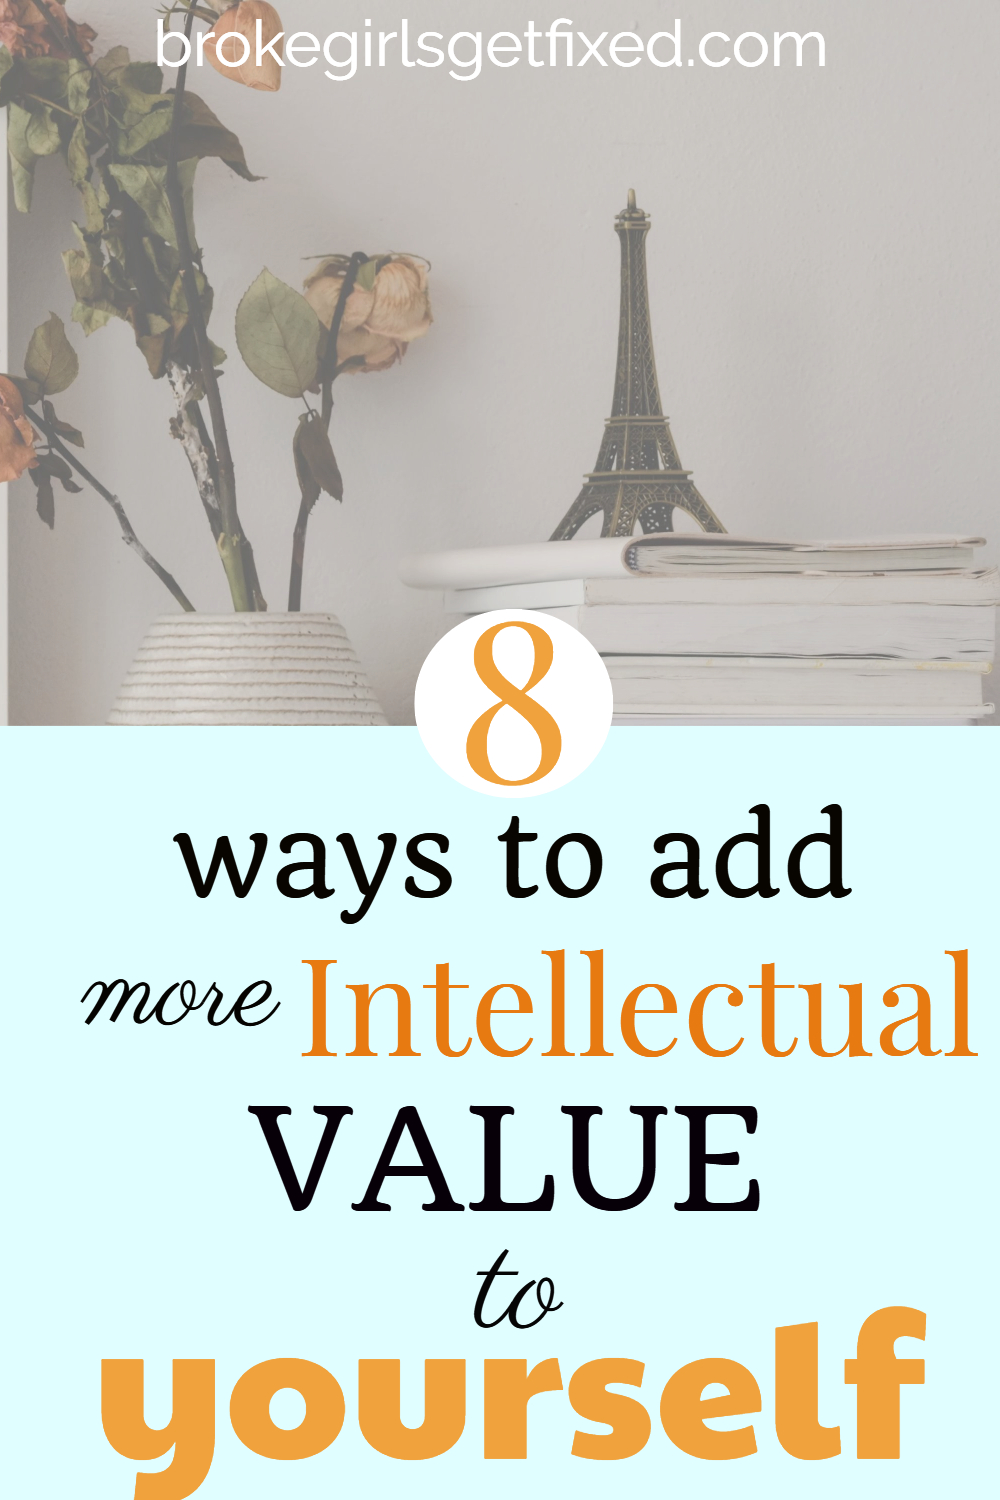 add more intellectual value to yourself to 